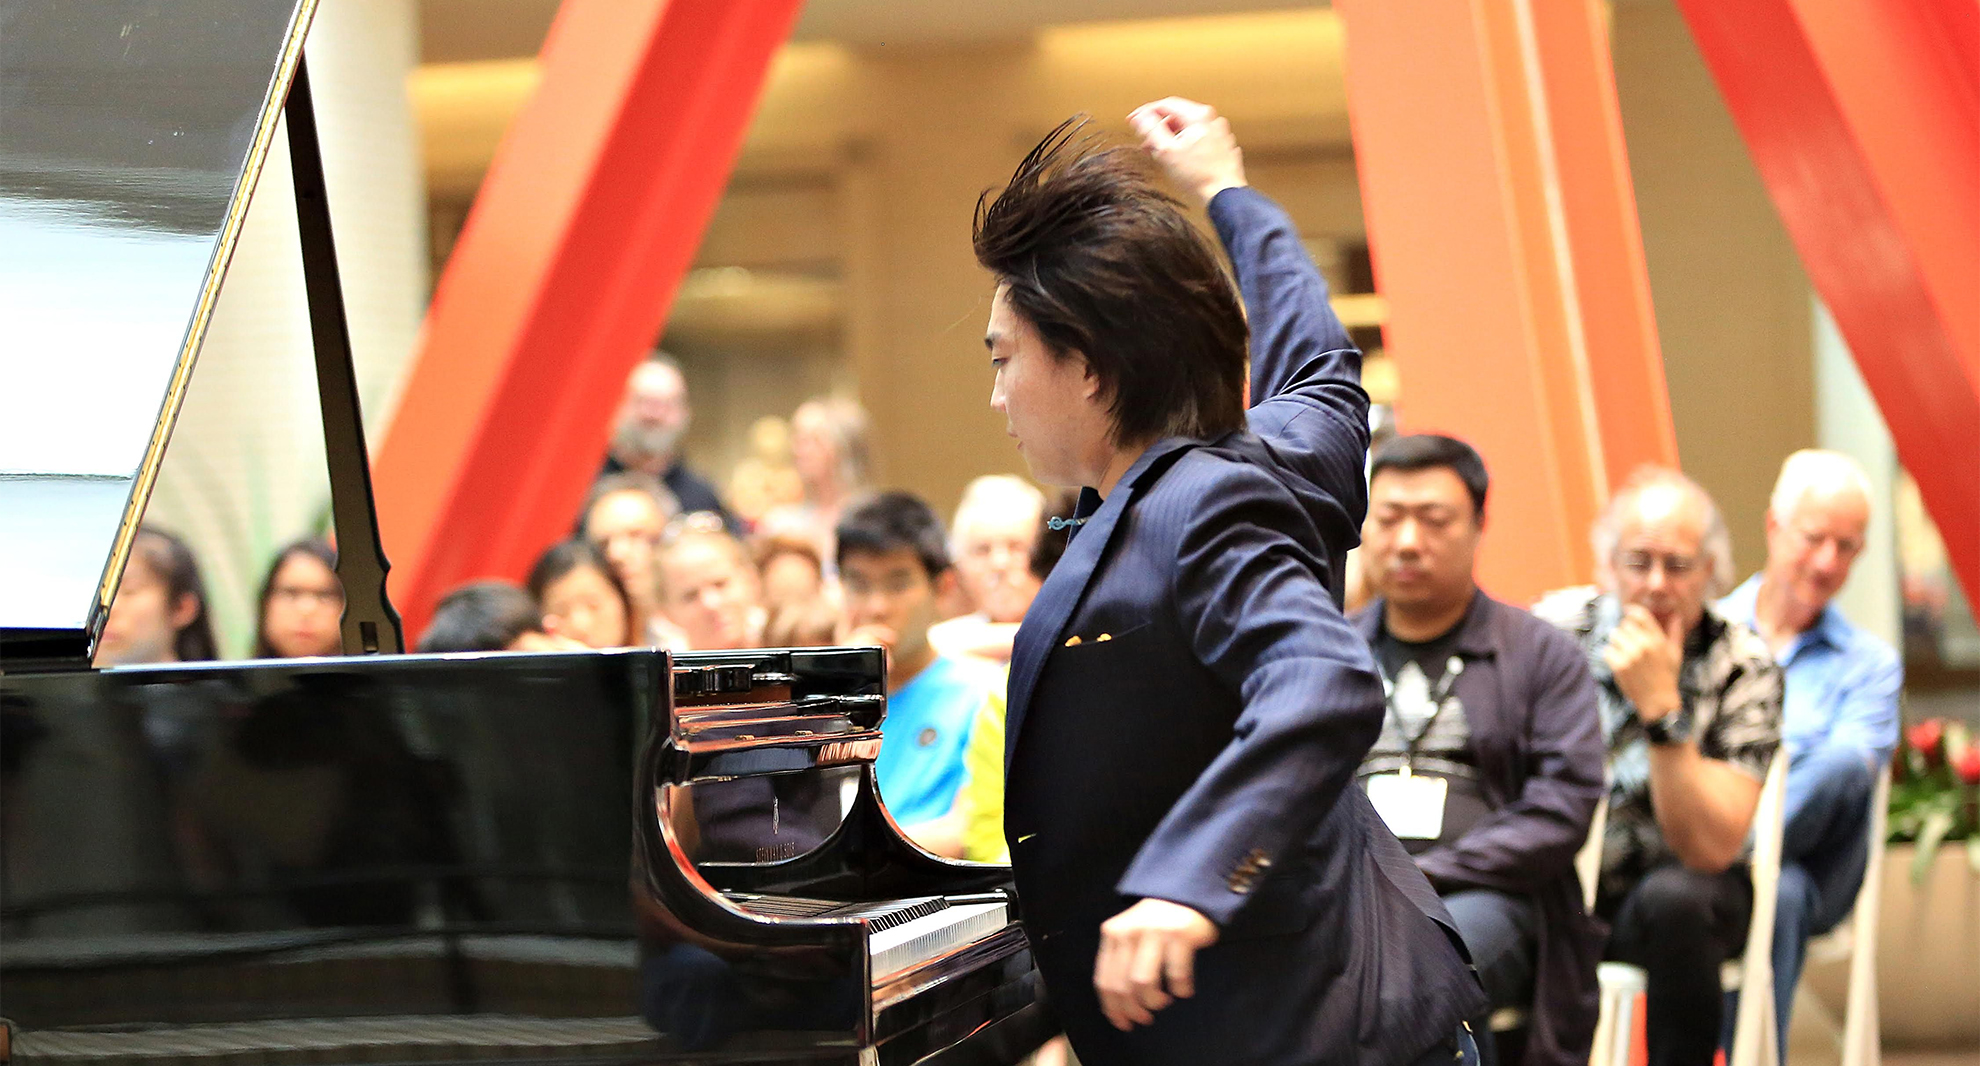 Meet the young competitors in this year's Cliburn International